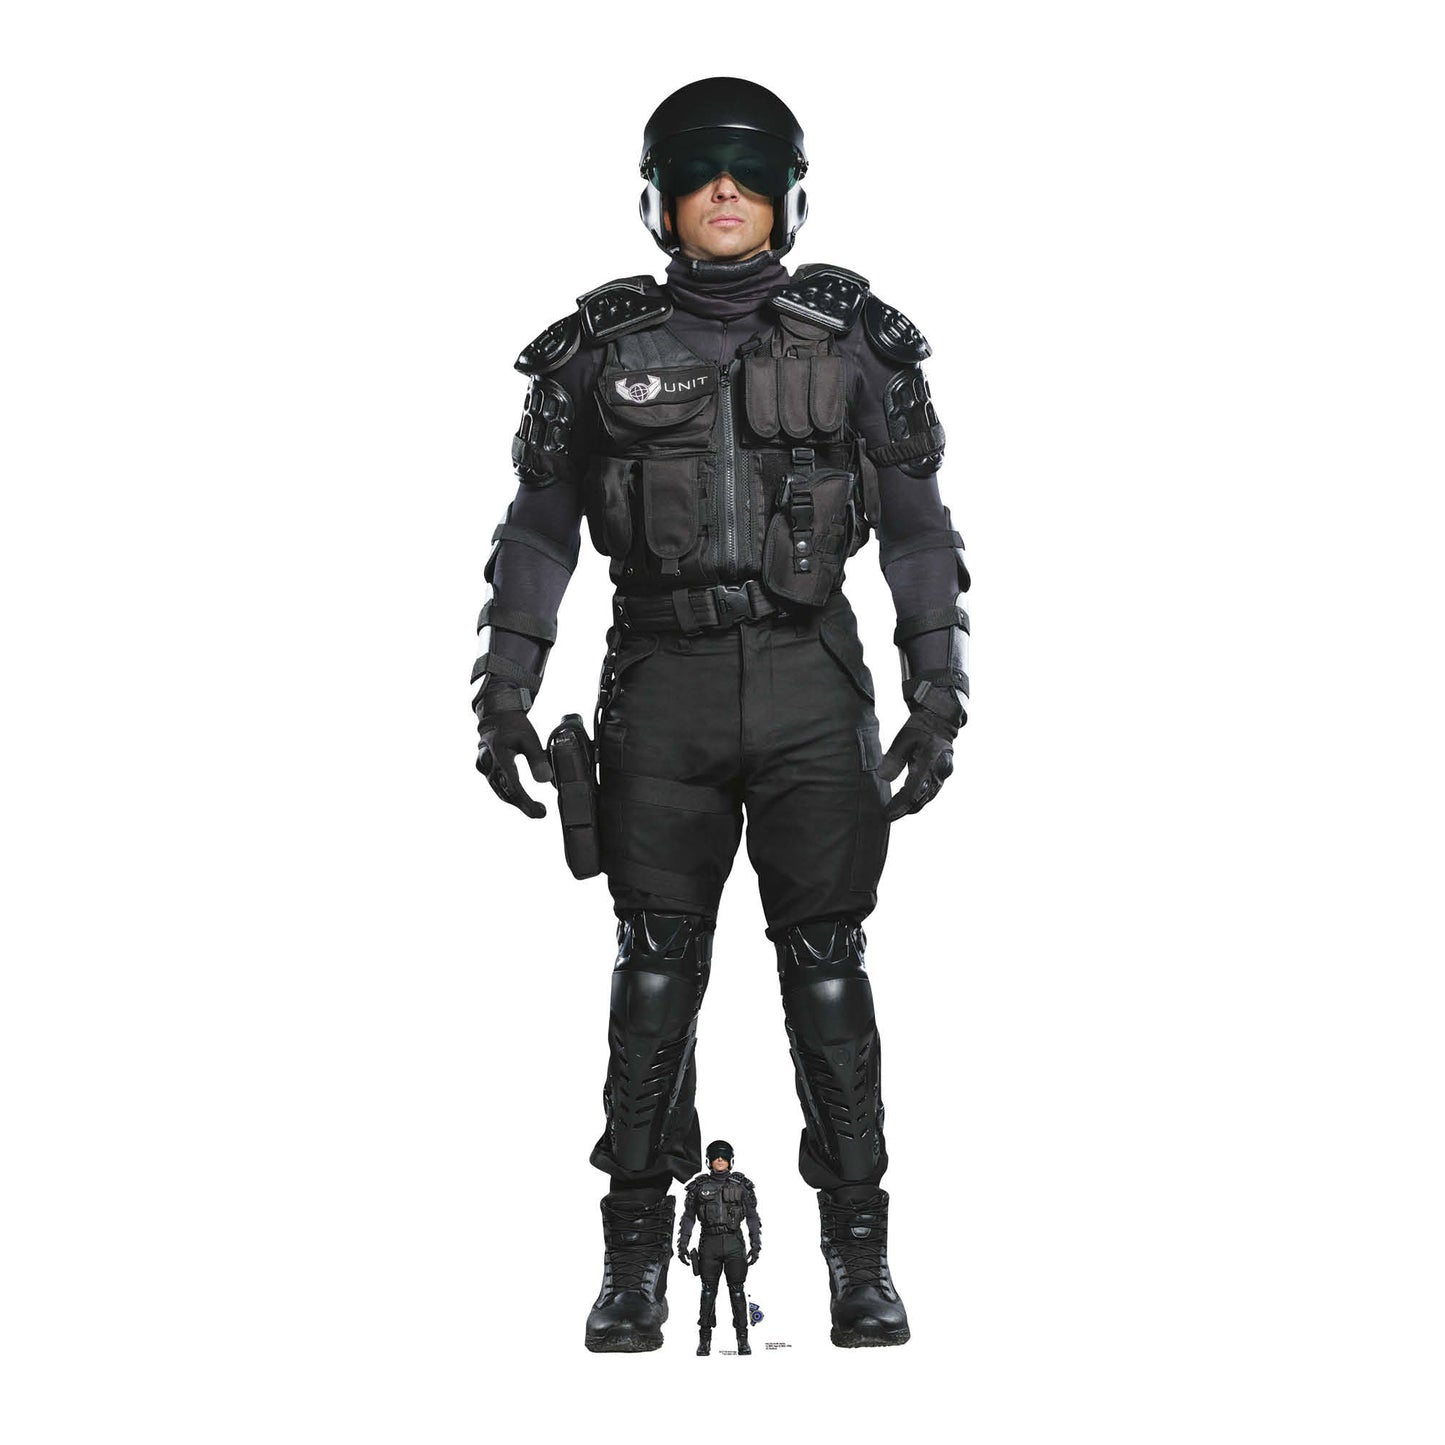 SC4356 UNIT soldier Cardboard Cut Out Height 186cm